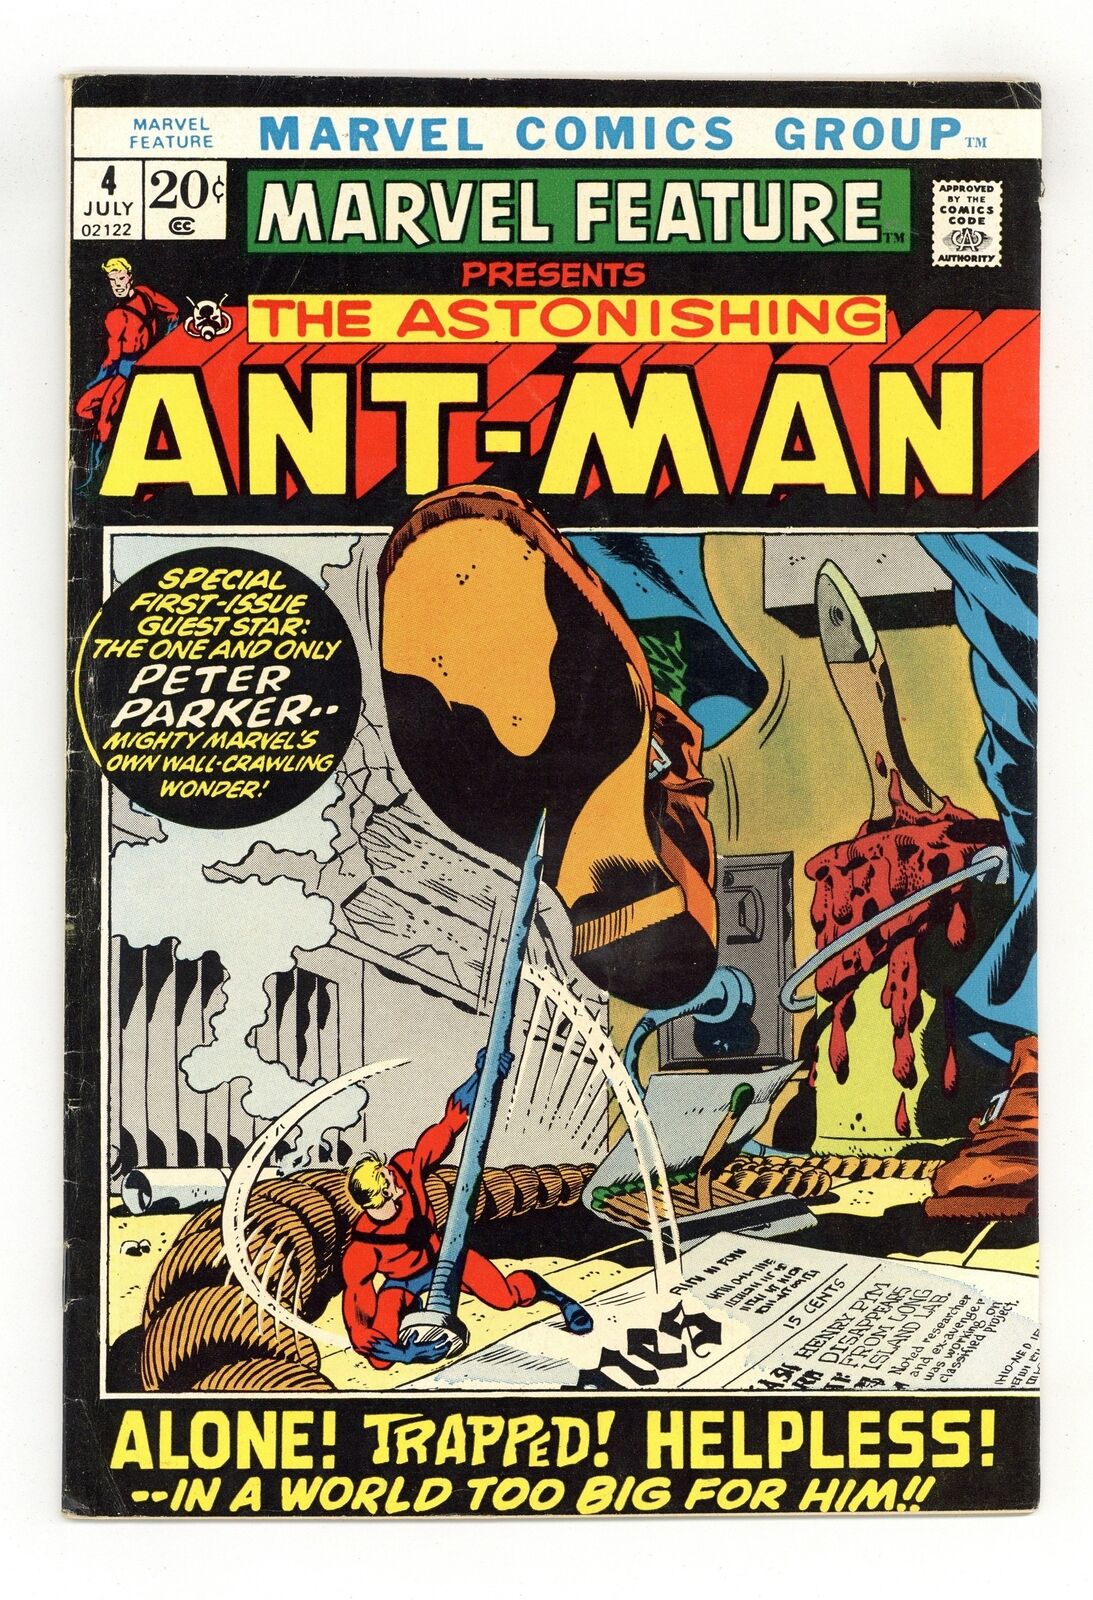 Marvel Feature #4 VG+ 4.5 1972 1st app. Ant-Man since 1960s